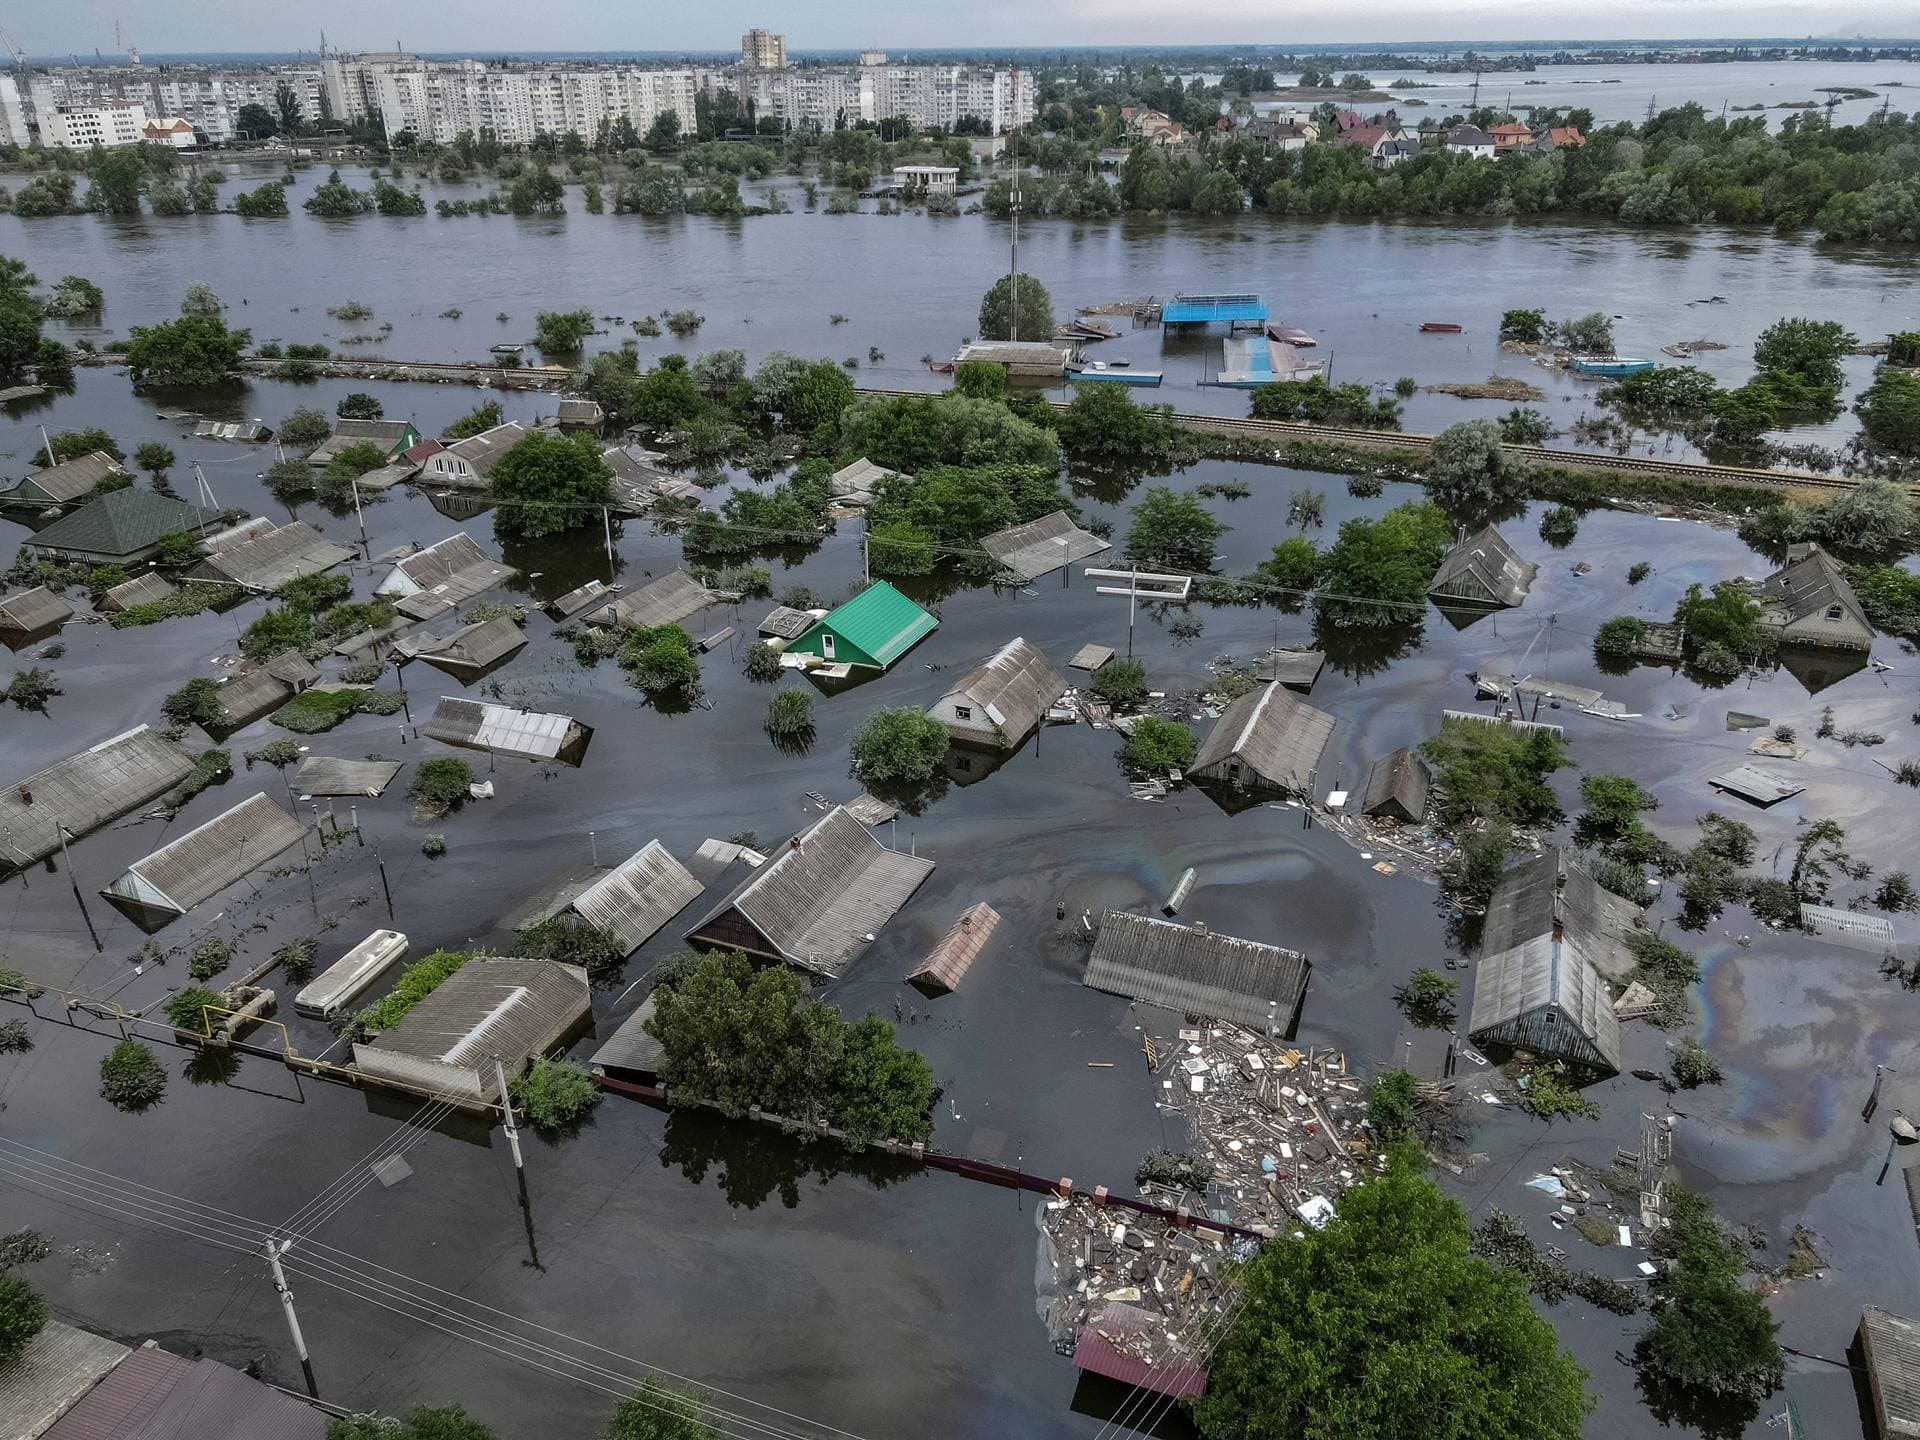 A flooded neighborhood in Kherson is pictured June 10